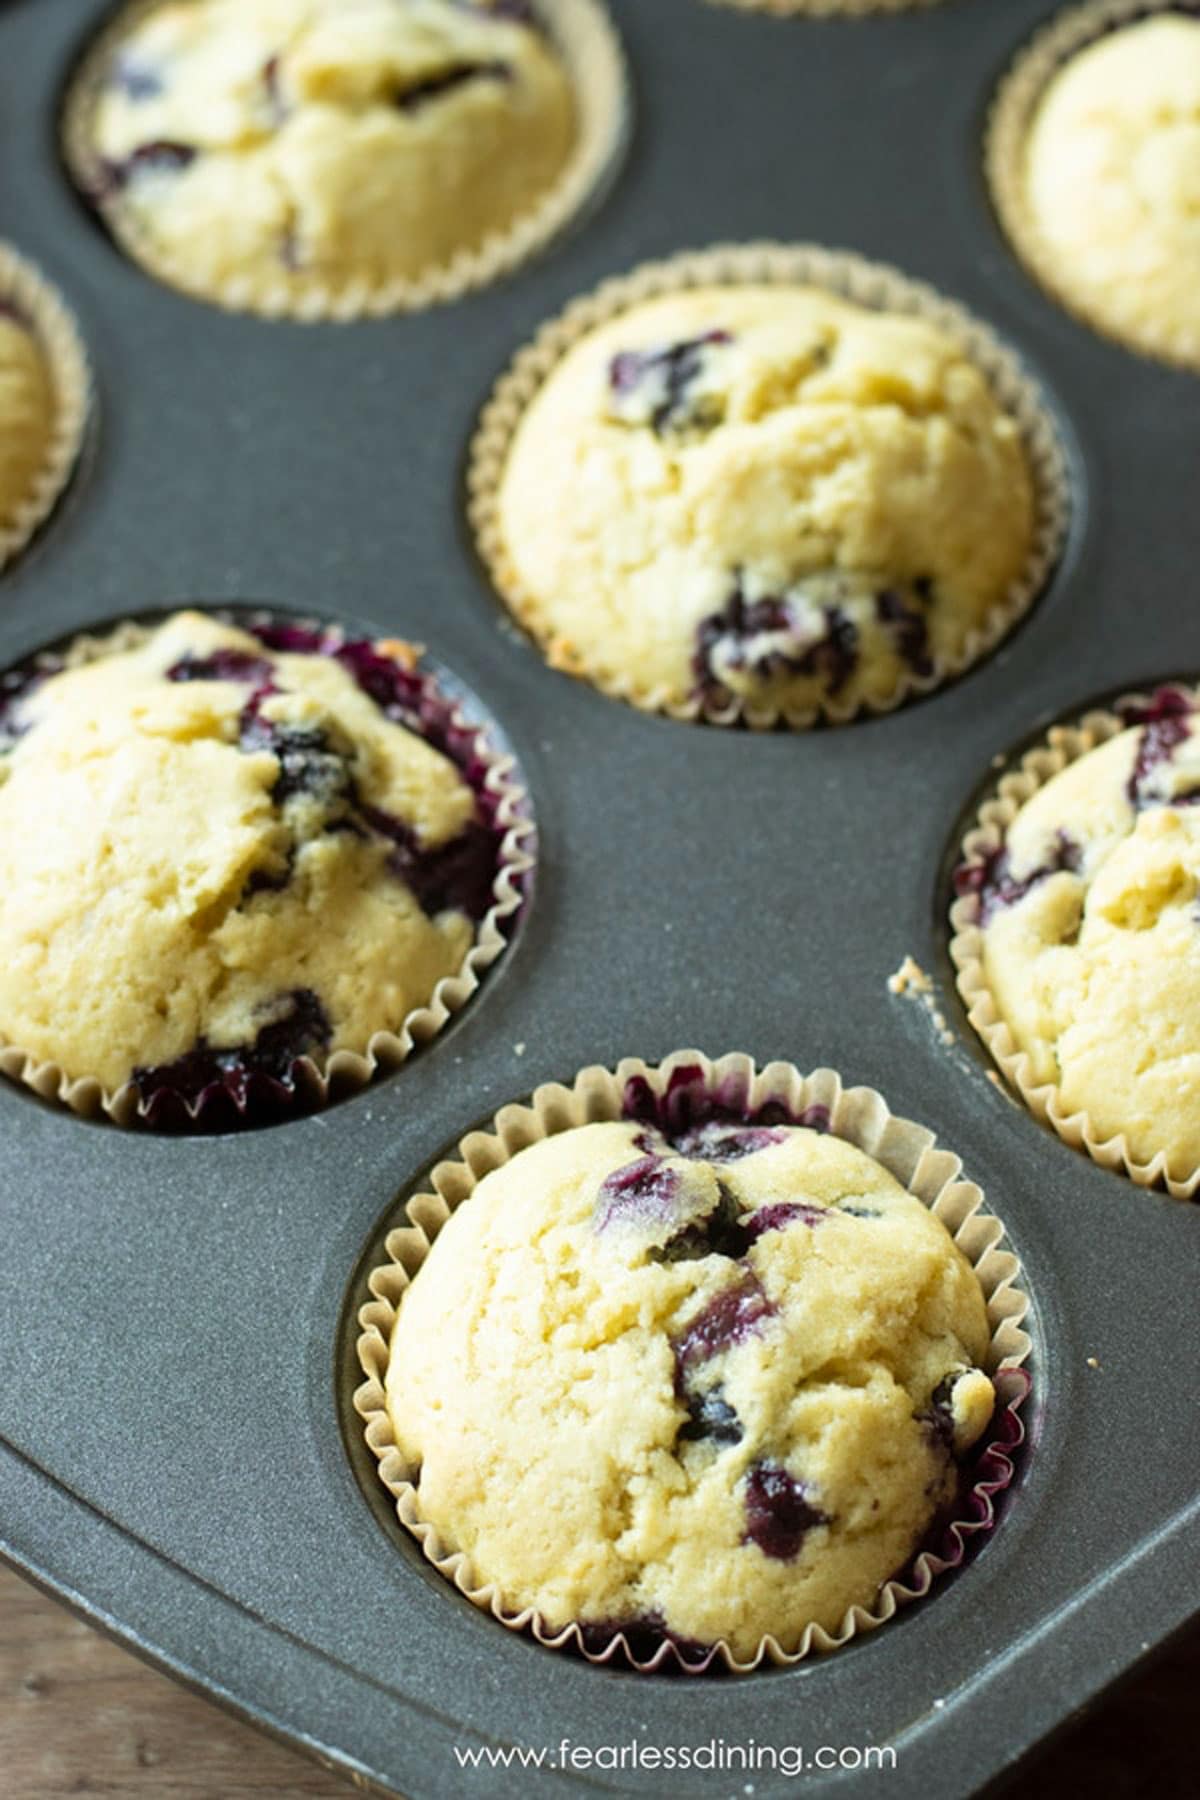 A muffin tin filled with baked gluten free blueberry muffins.